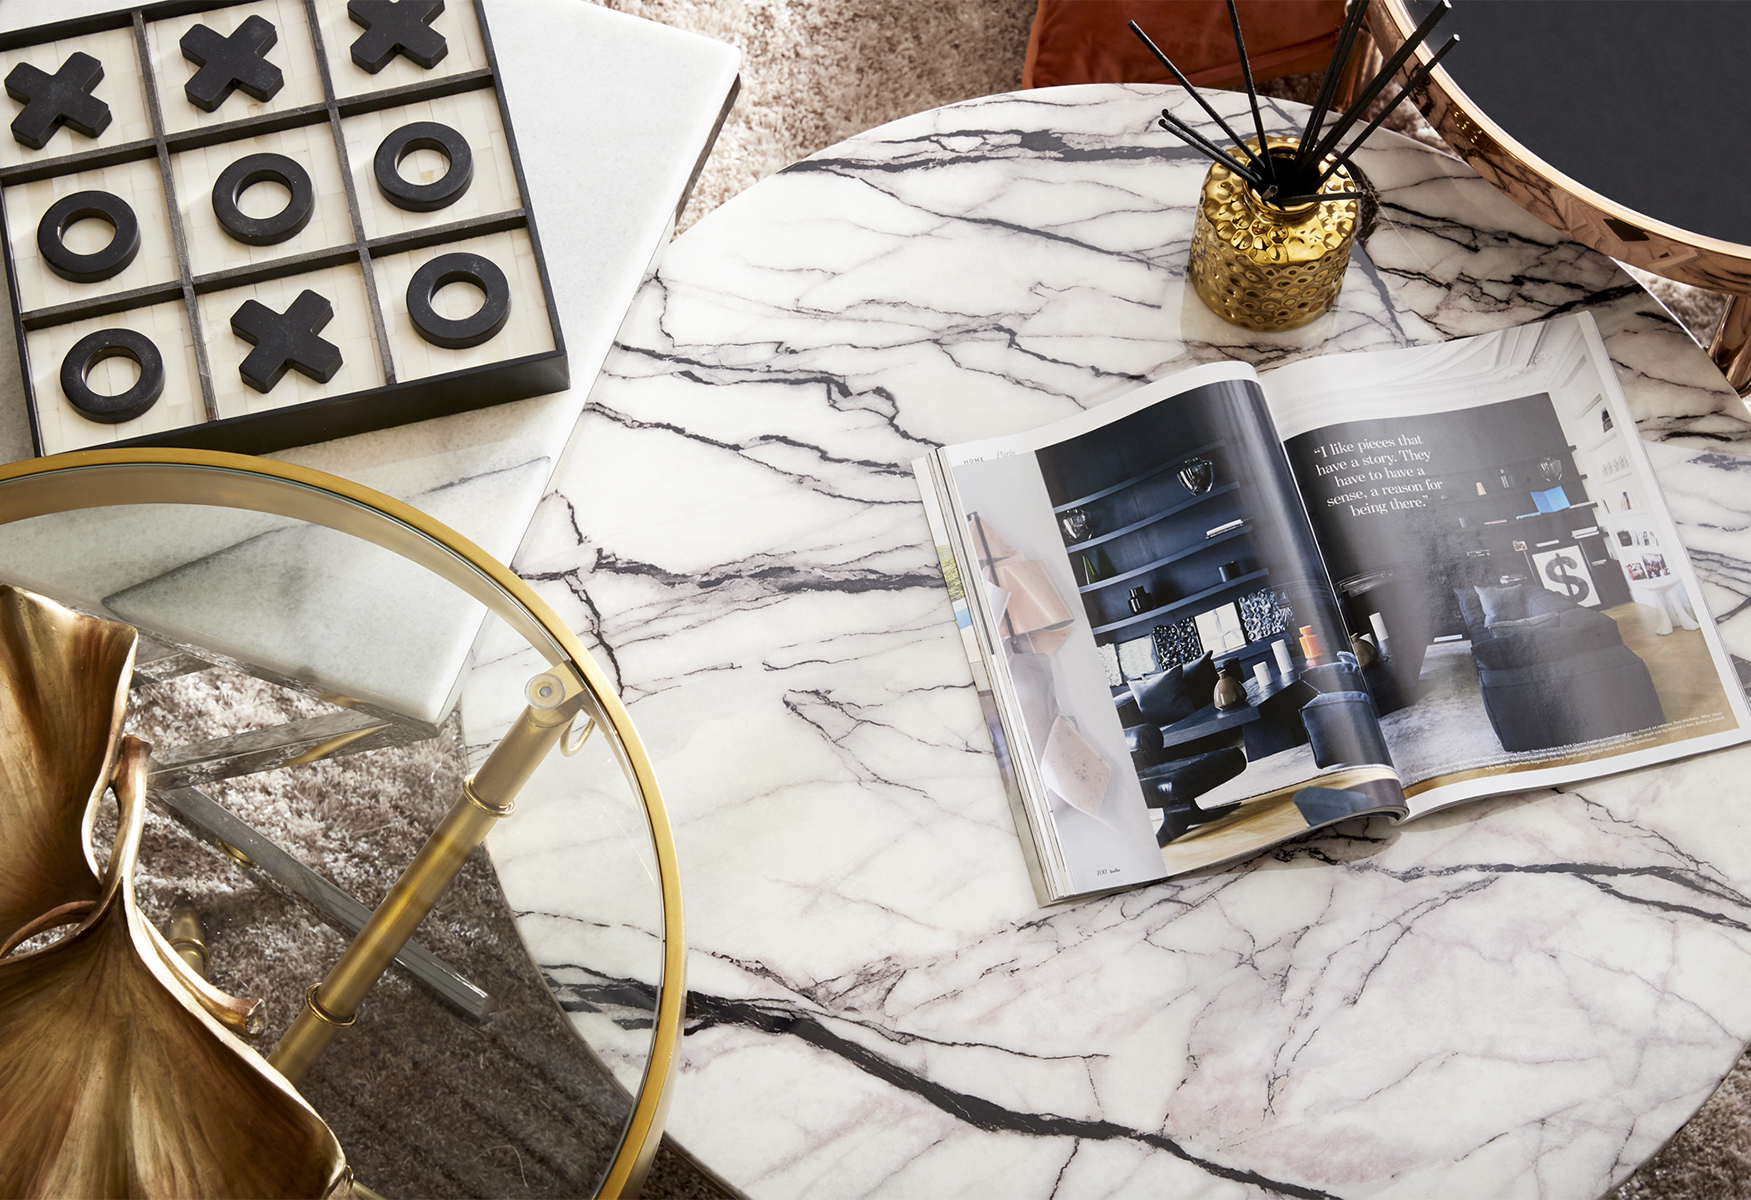 Oracle Marble coffee table